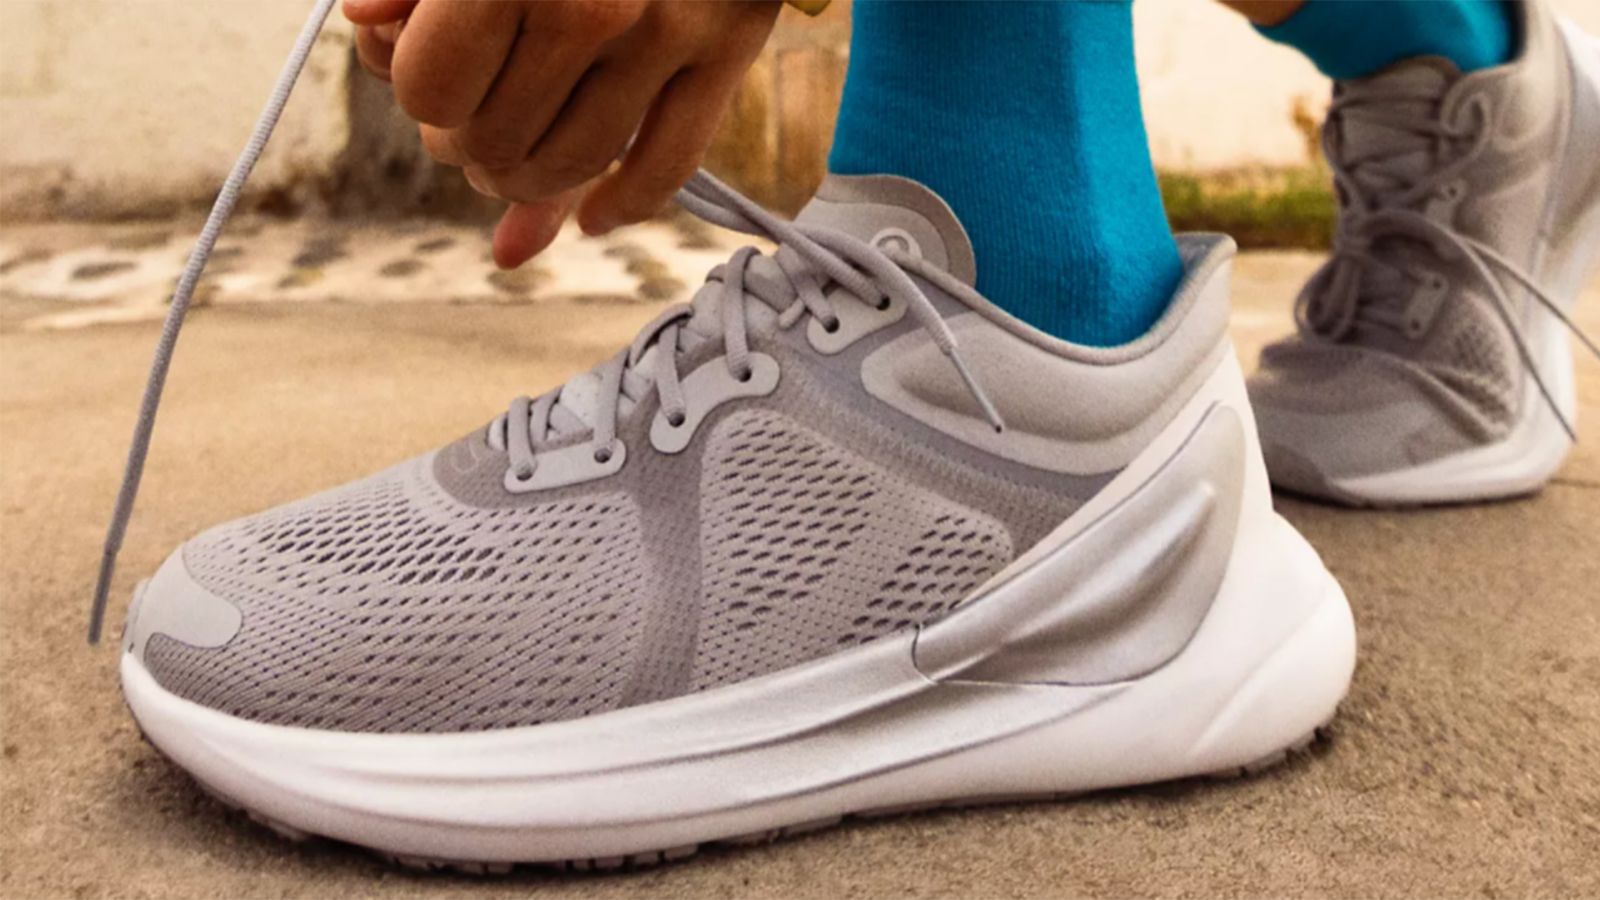 Lululemon Launches Men's Footwear For Running And Active Lifestyles